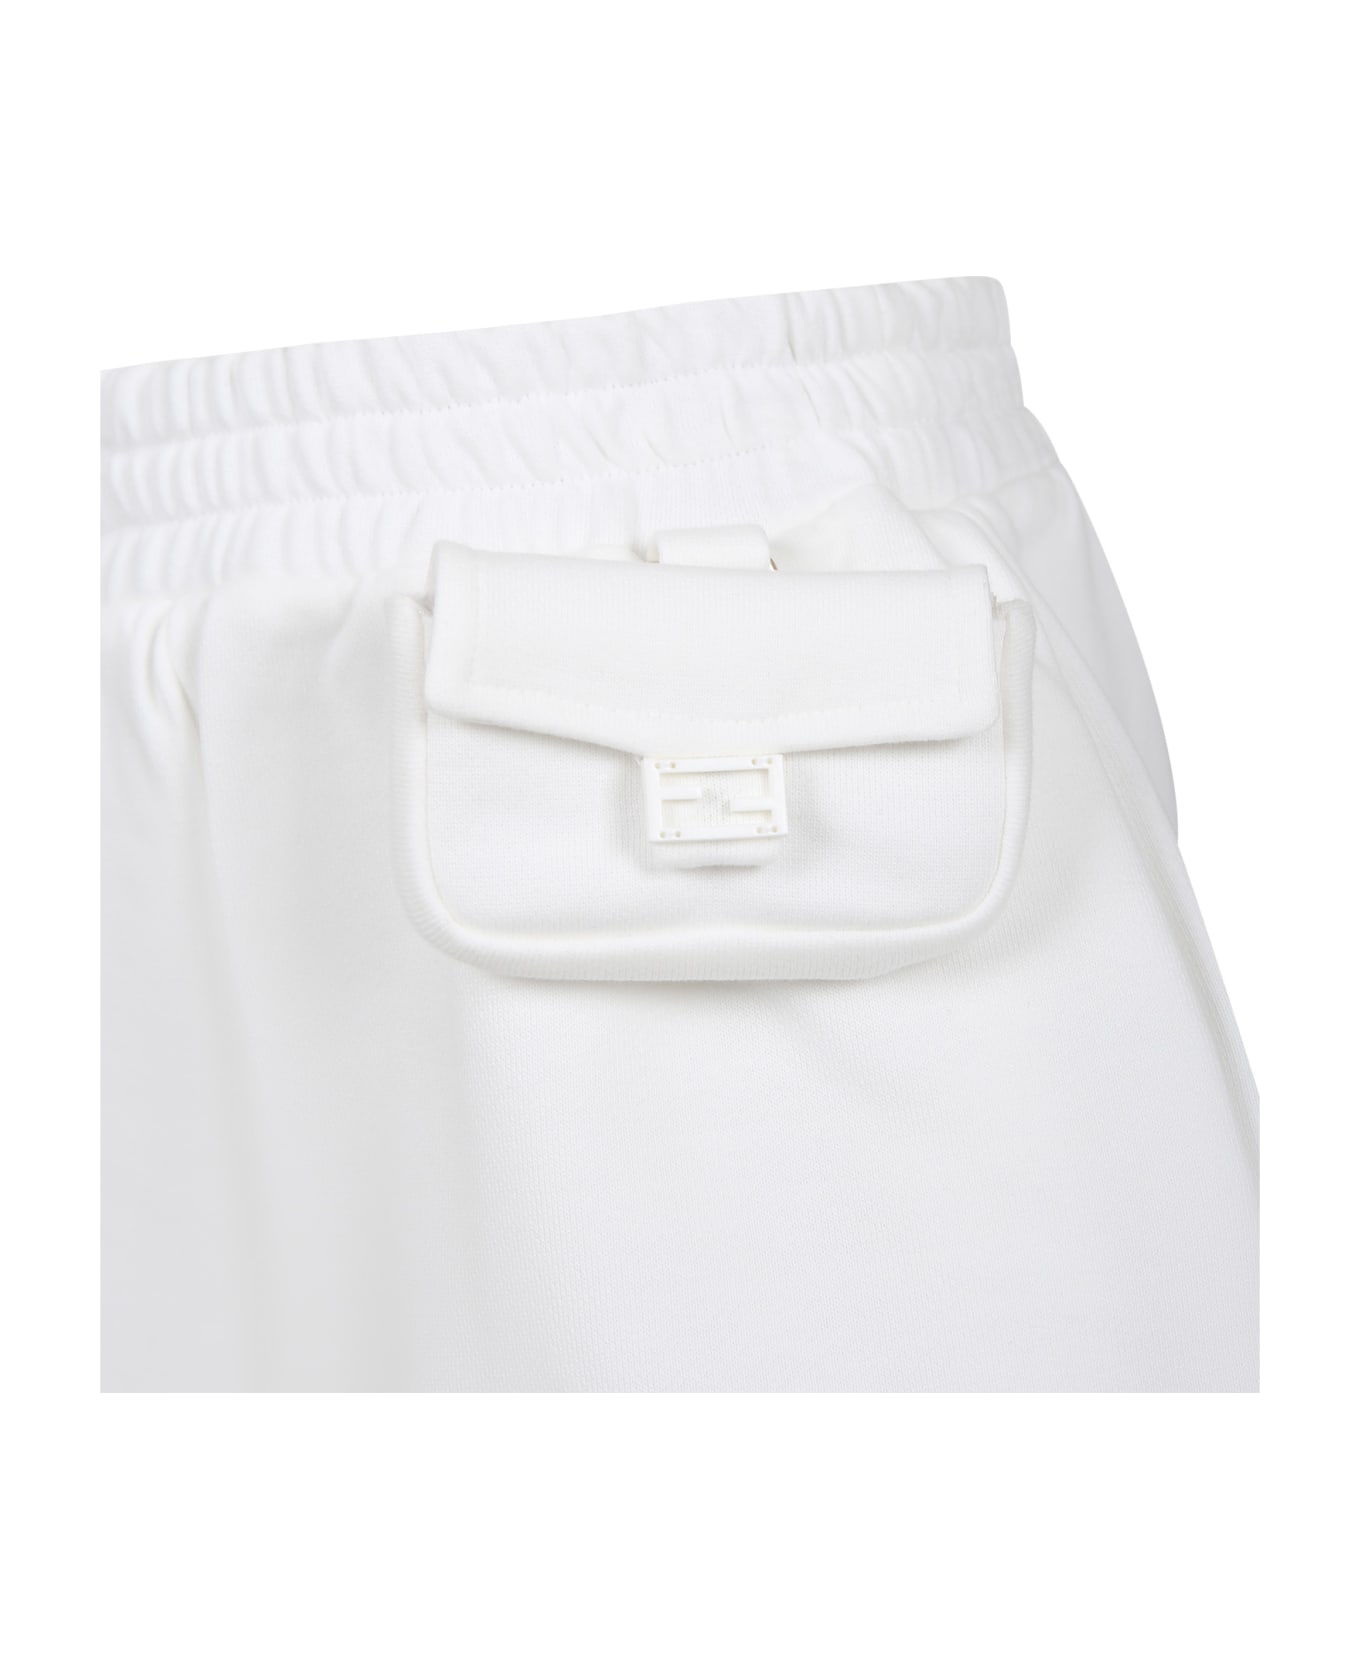 Fendi White Shorts For Girl With Micro Baguette - White ボトムス